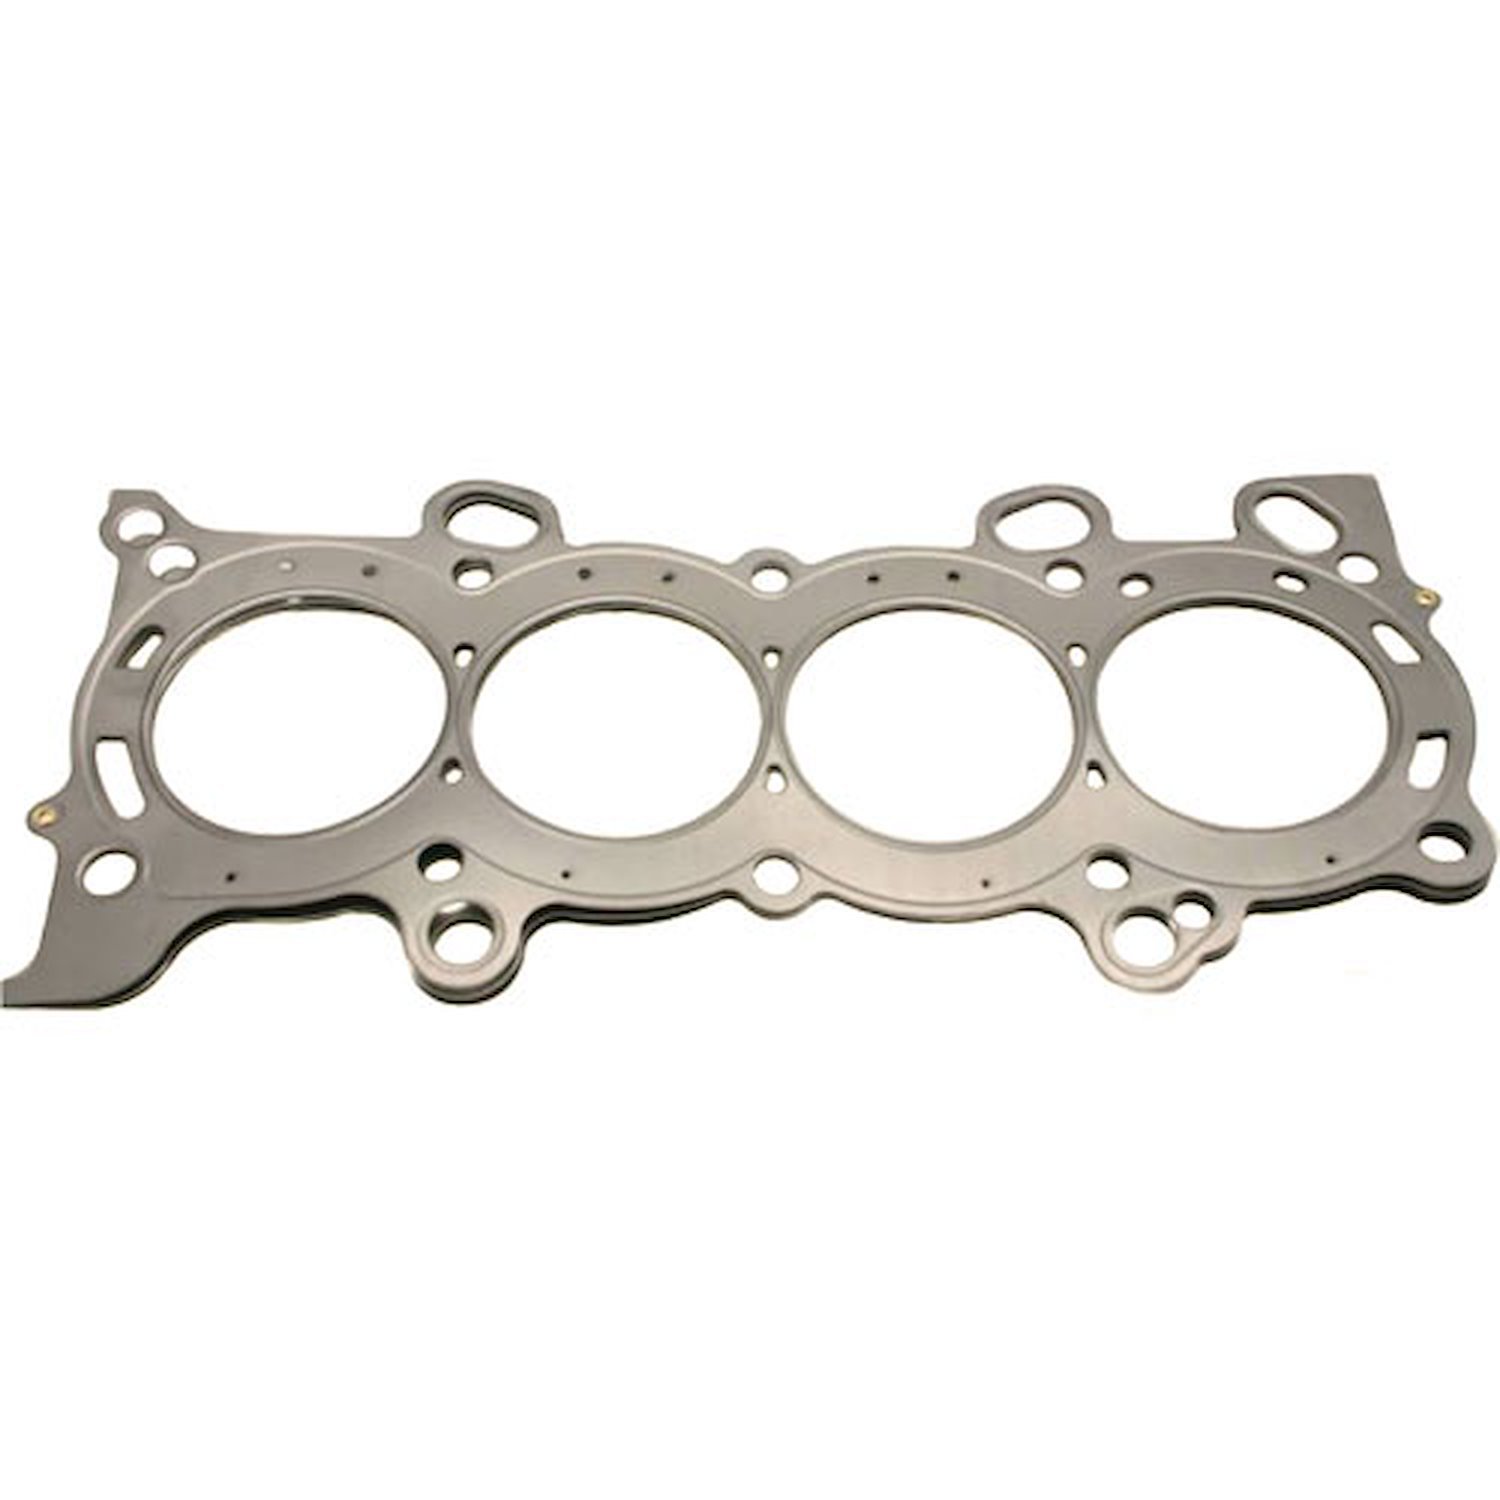 Head Gasket for Select 2002-2006 Acura RSX/Honda Civic,